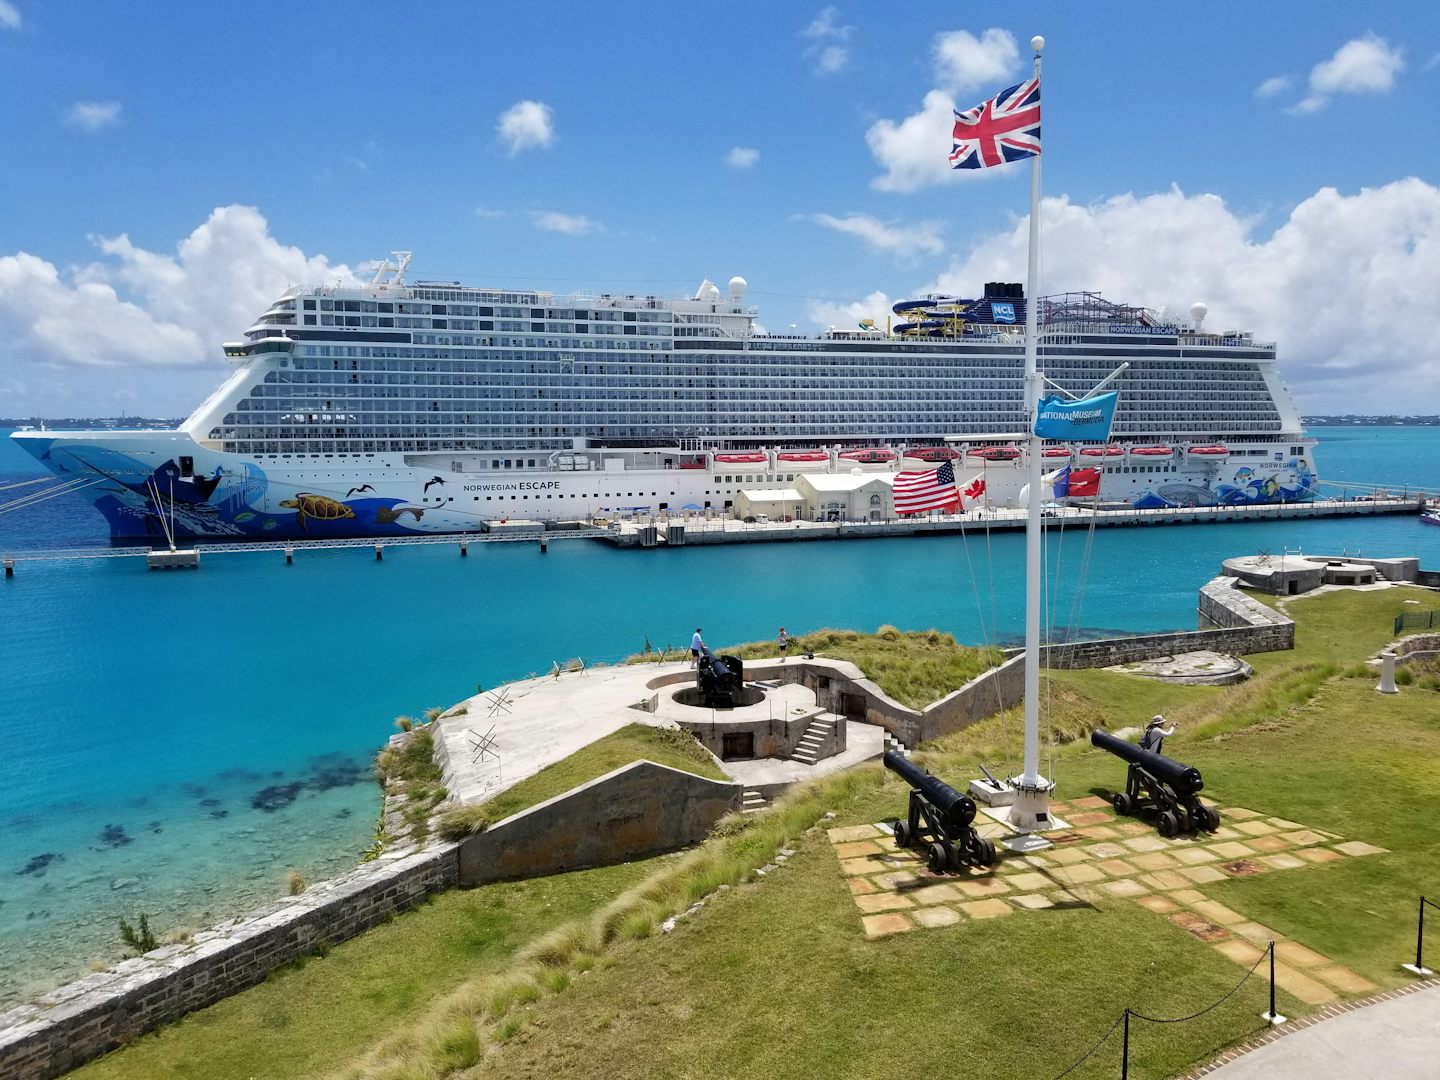 The Norwegian Escape as seen from the Royal Dockyard in Bermuda